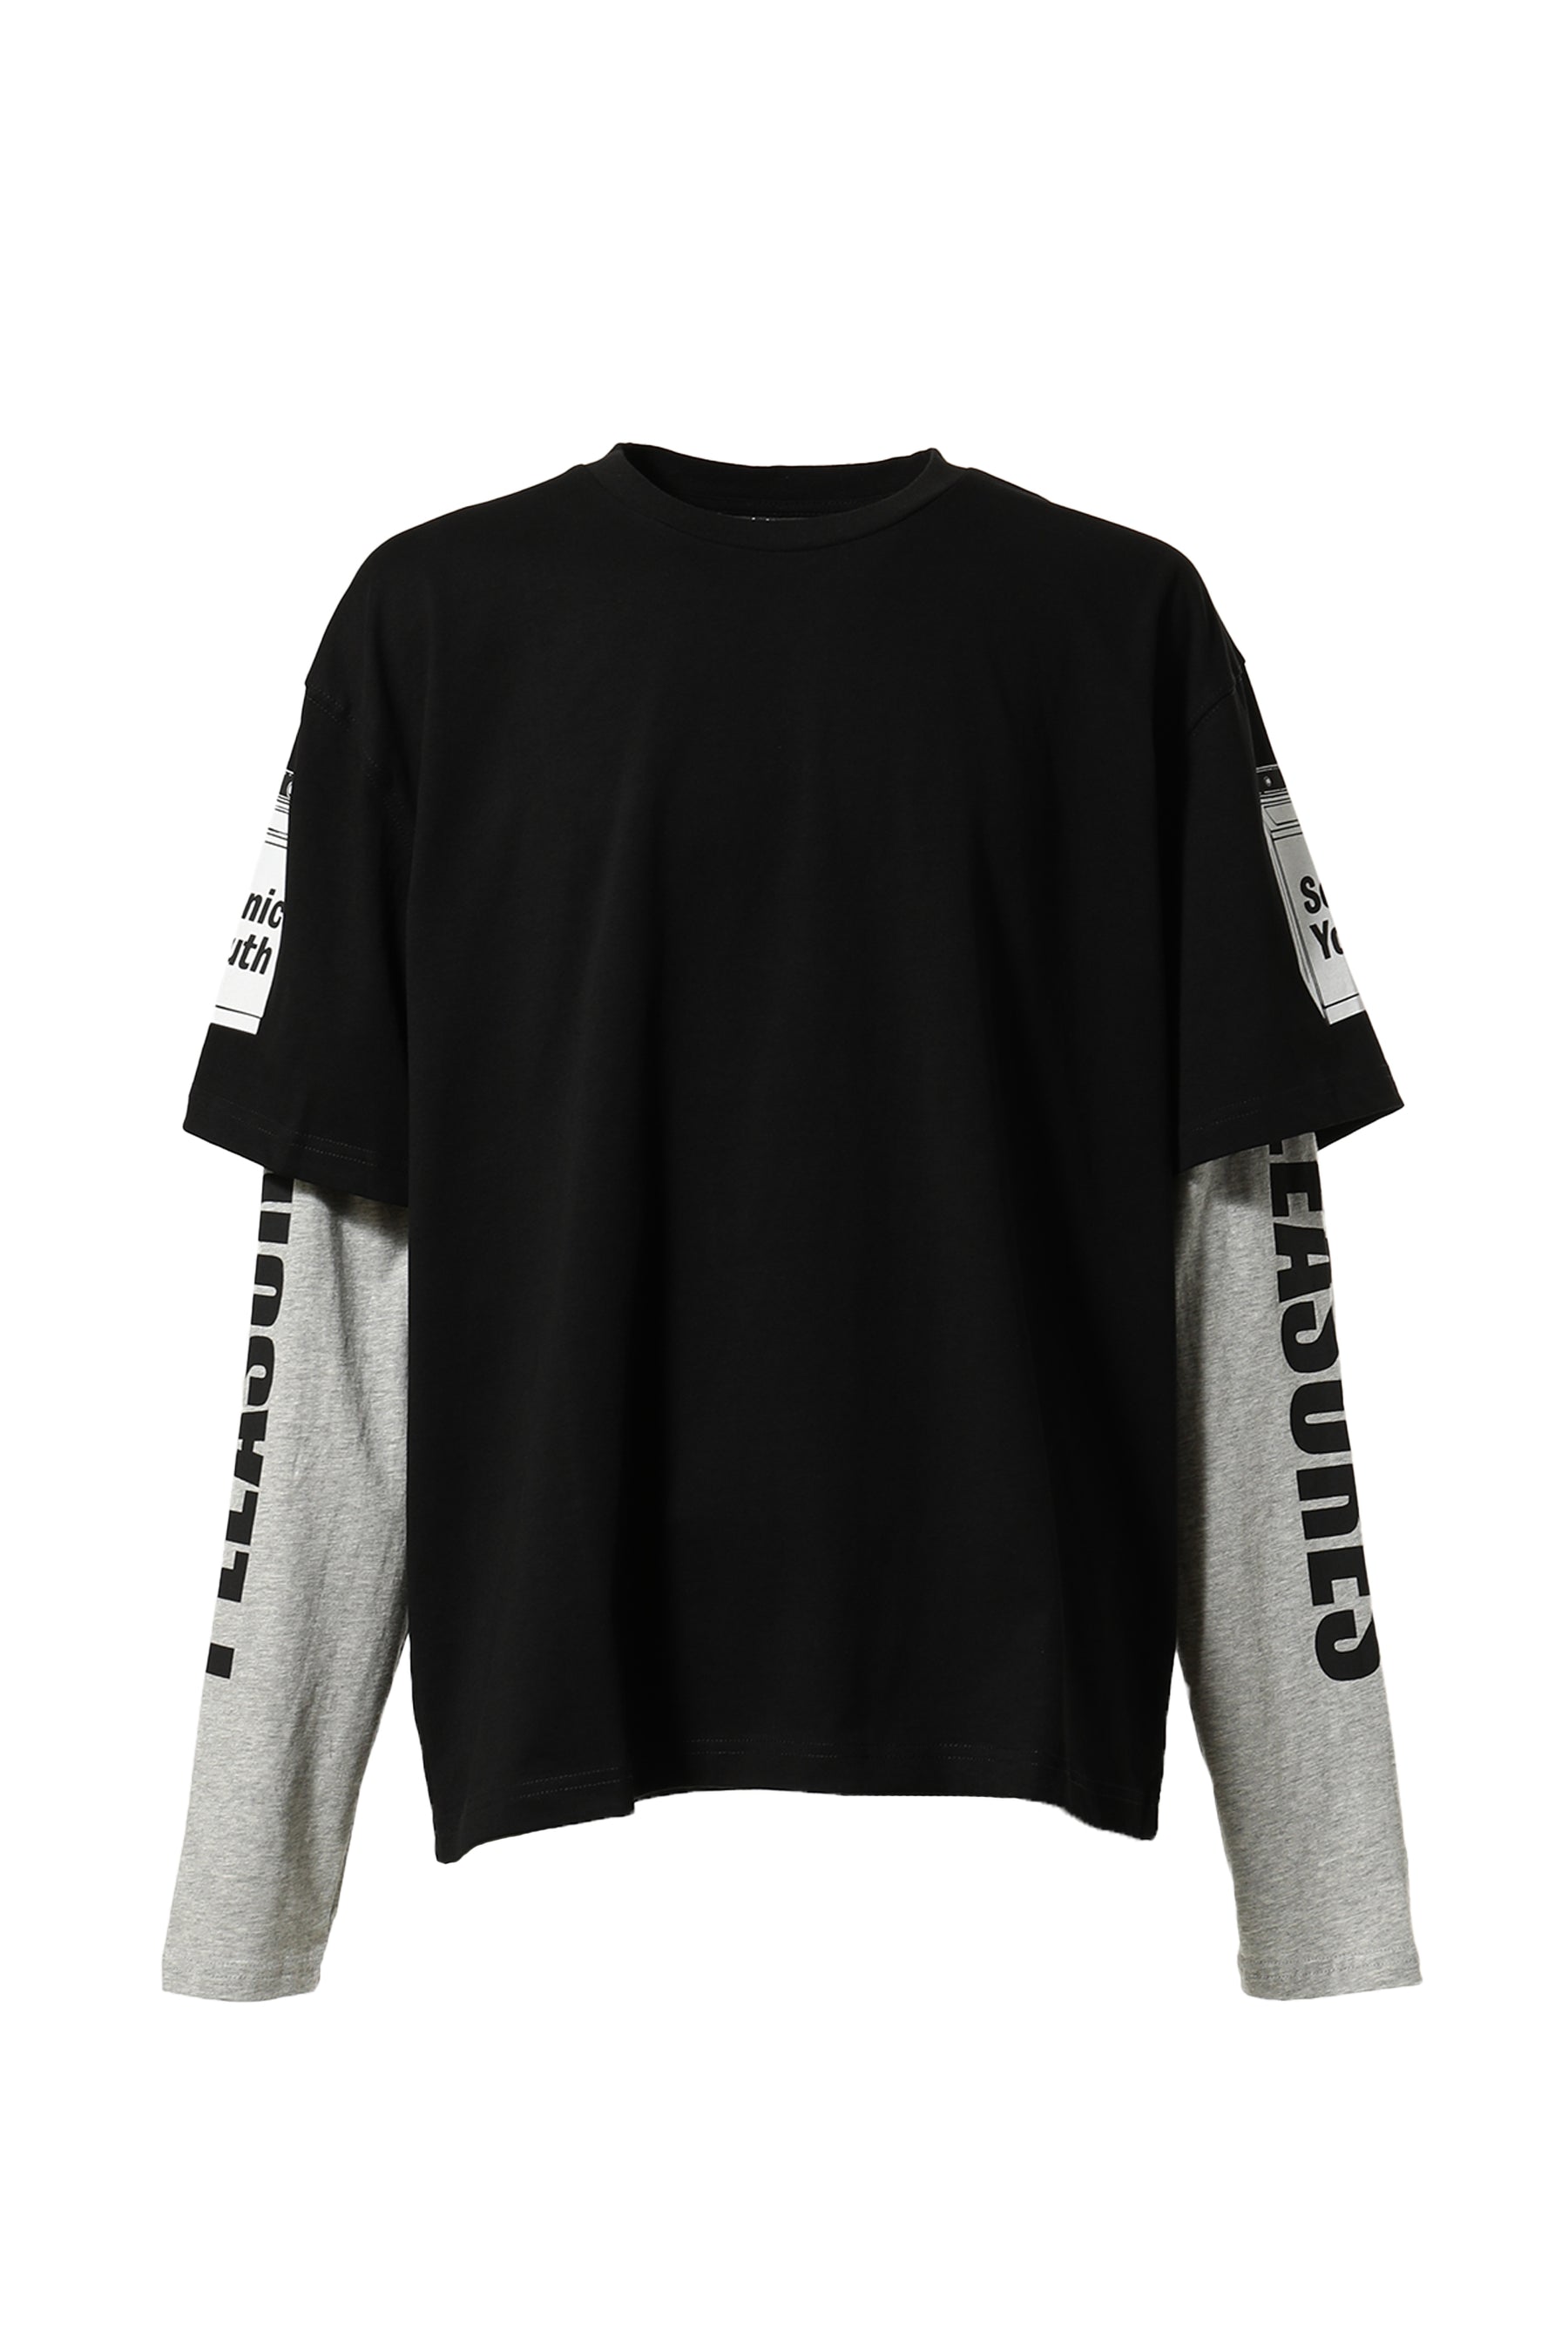 BECUZ LAYERED LONG SLEEVE / BLK GRY